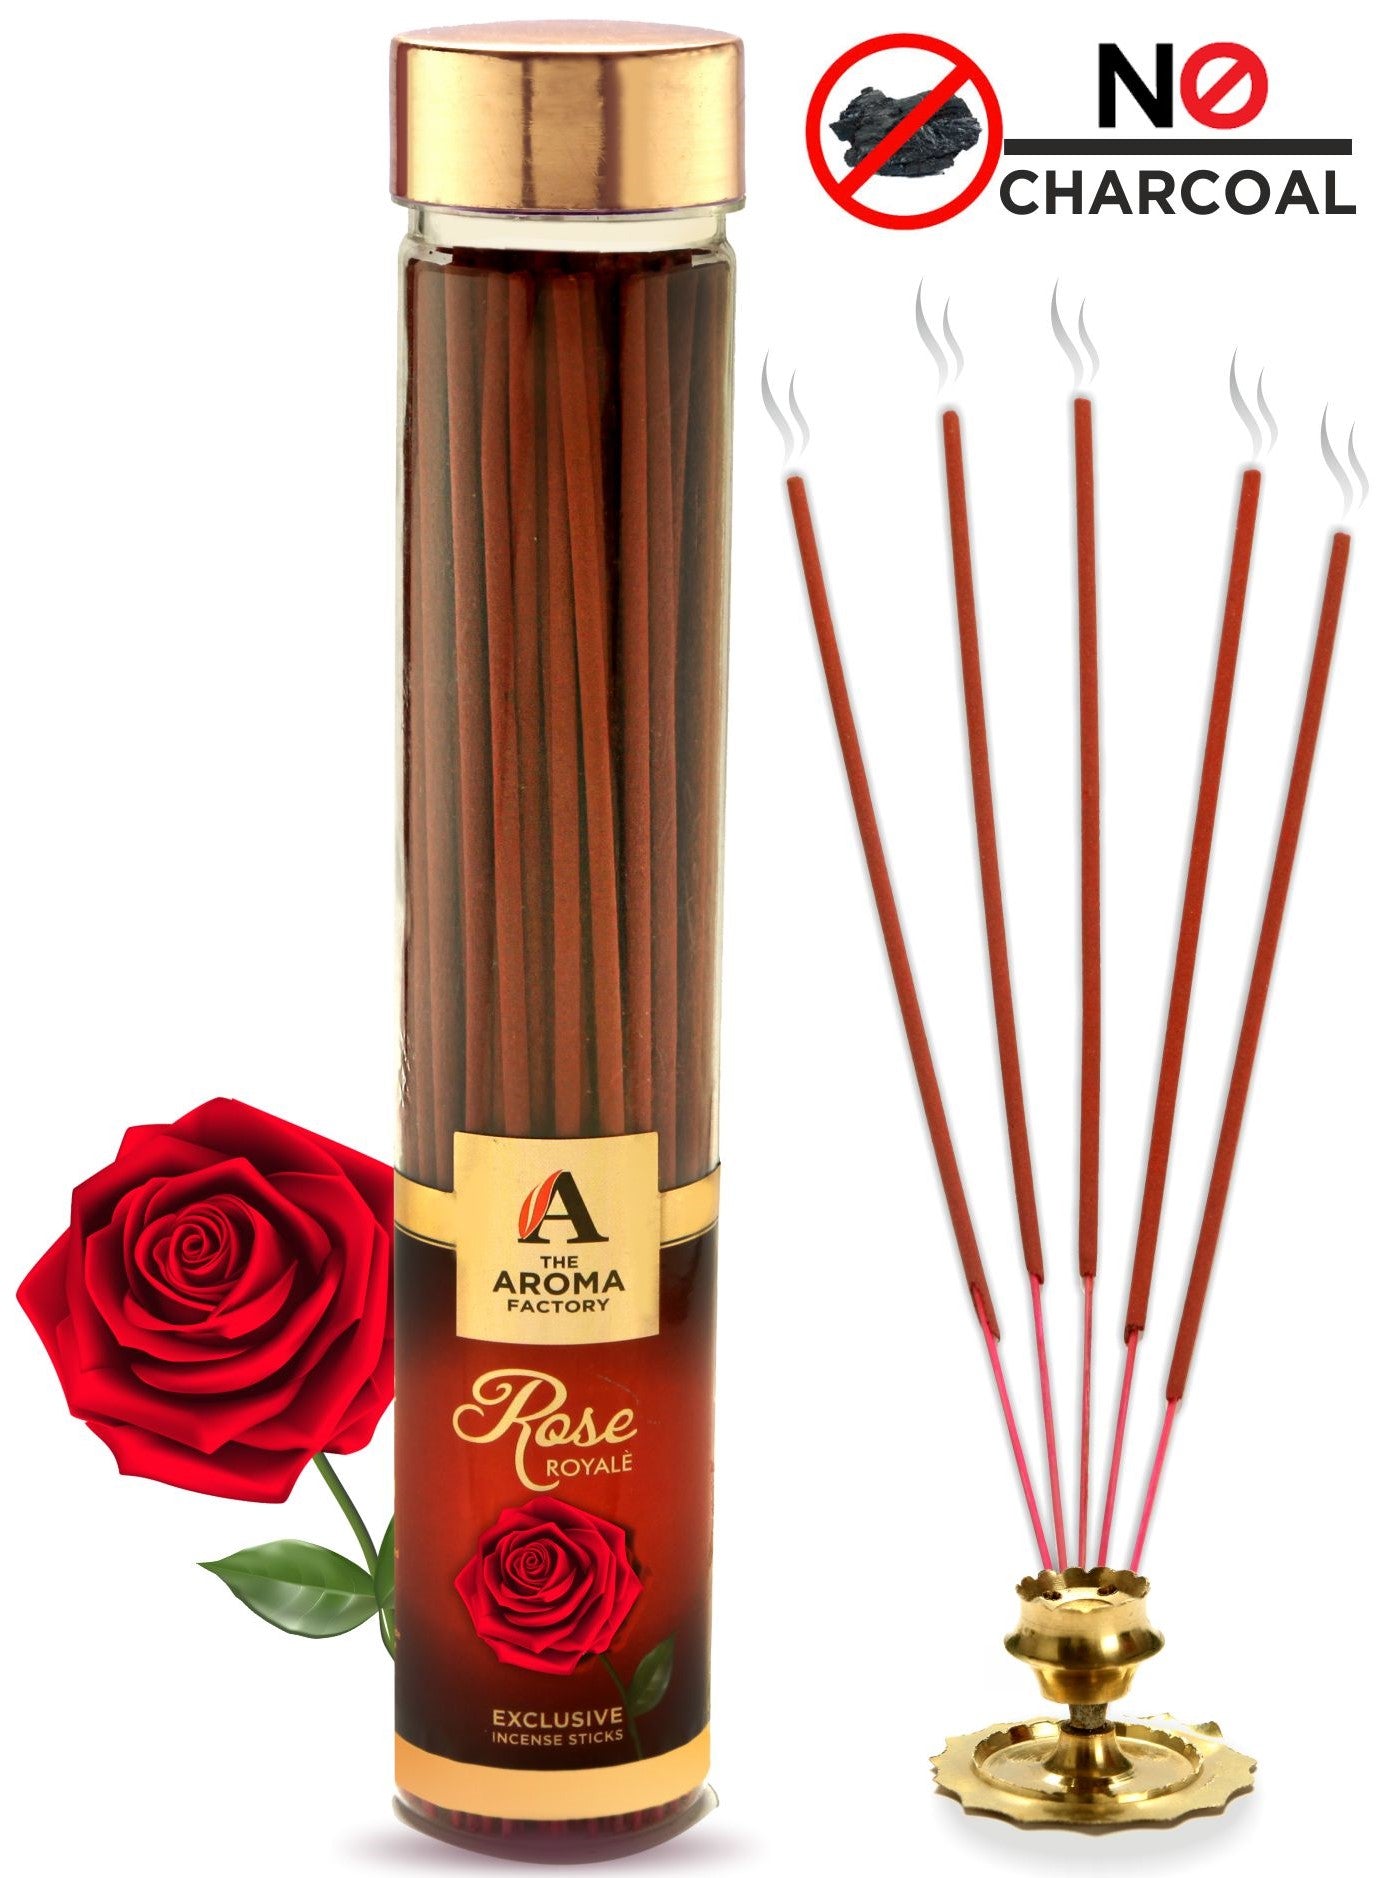 The Aroma Factory Rose Royal Incense Sticks Agarbatti (Charcoal Free & 100% Herbal) Bottle, 100g